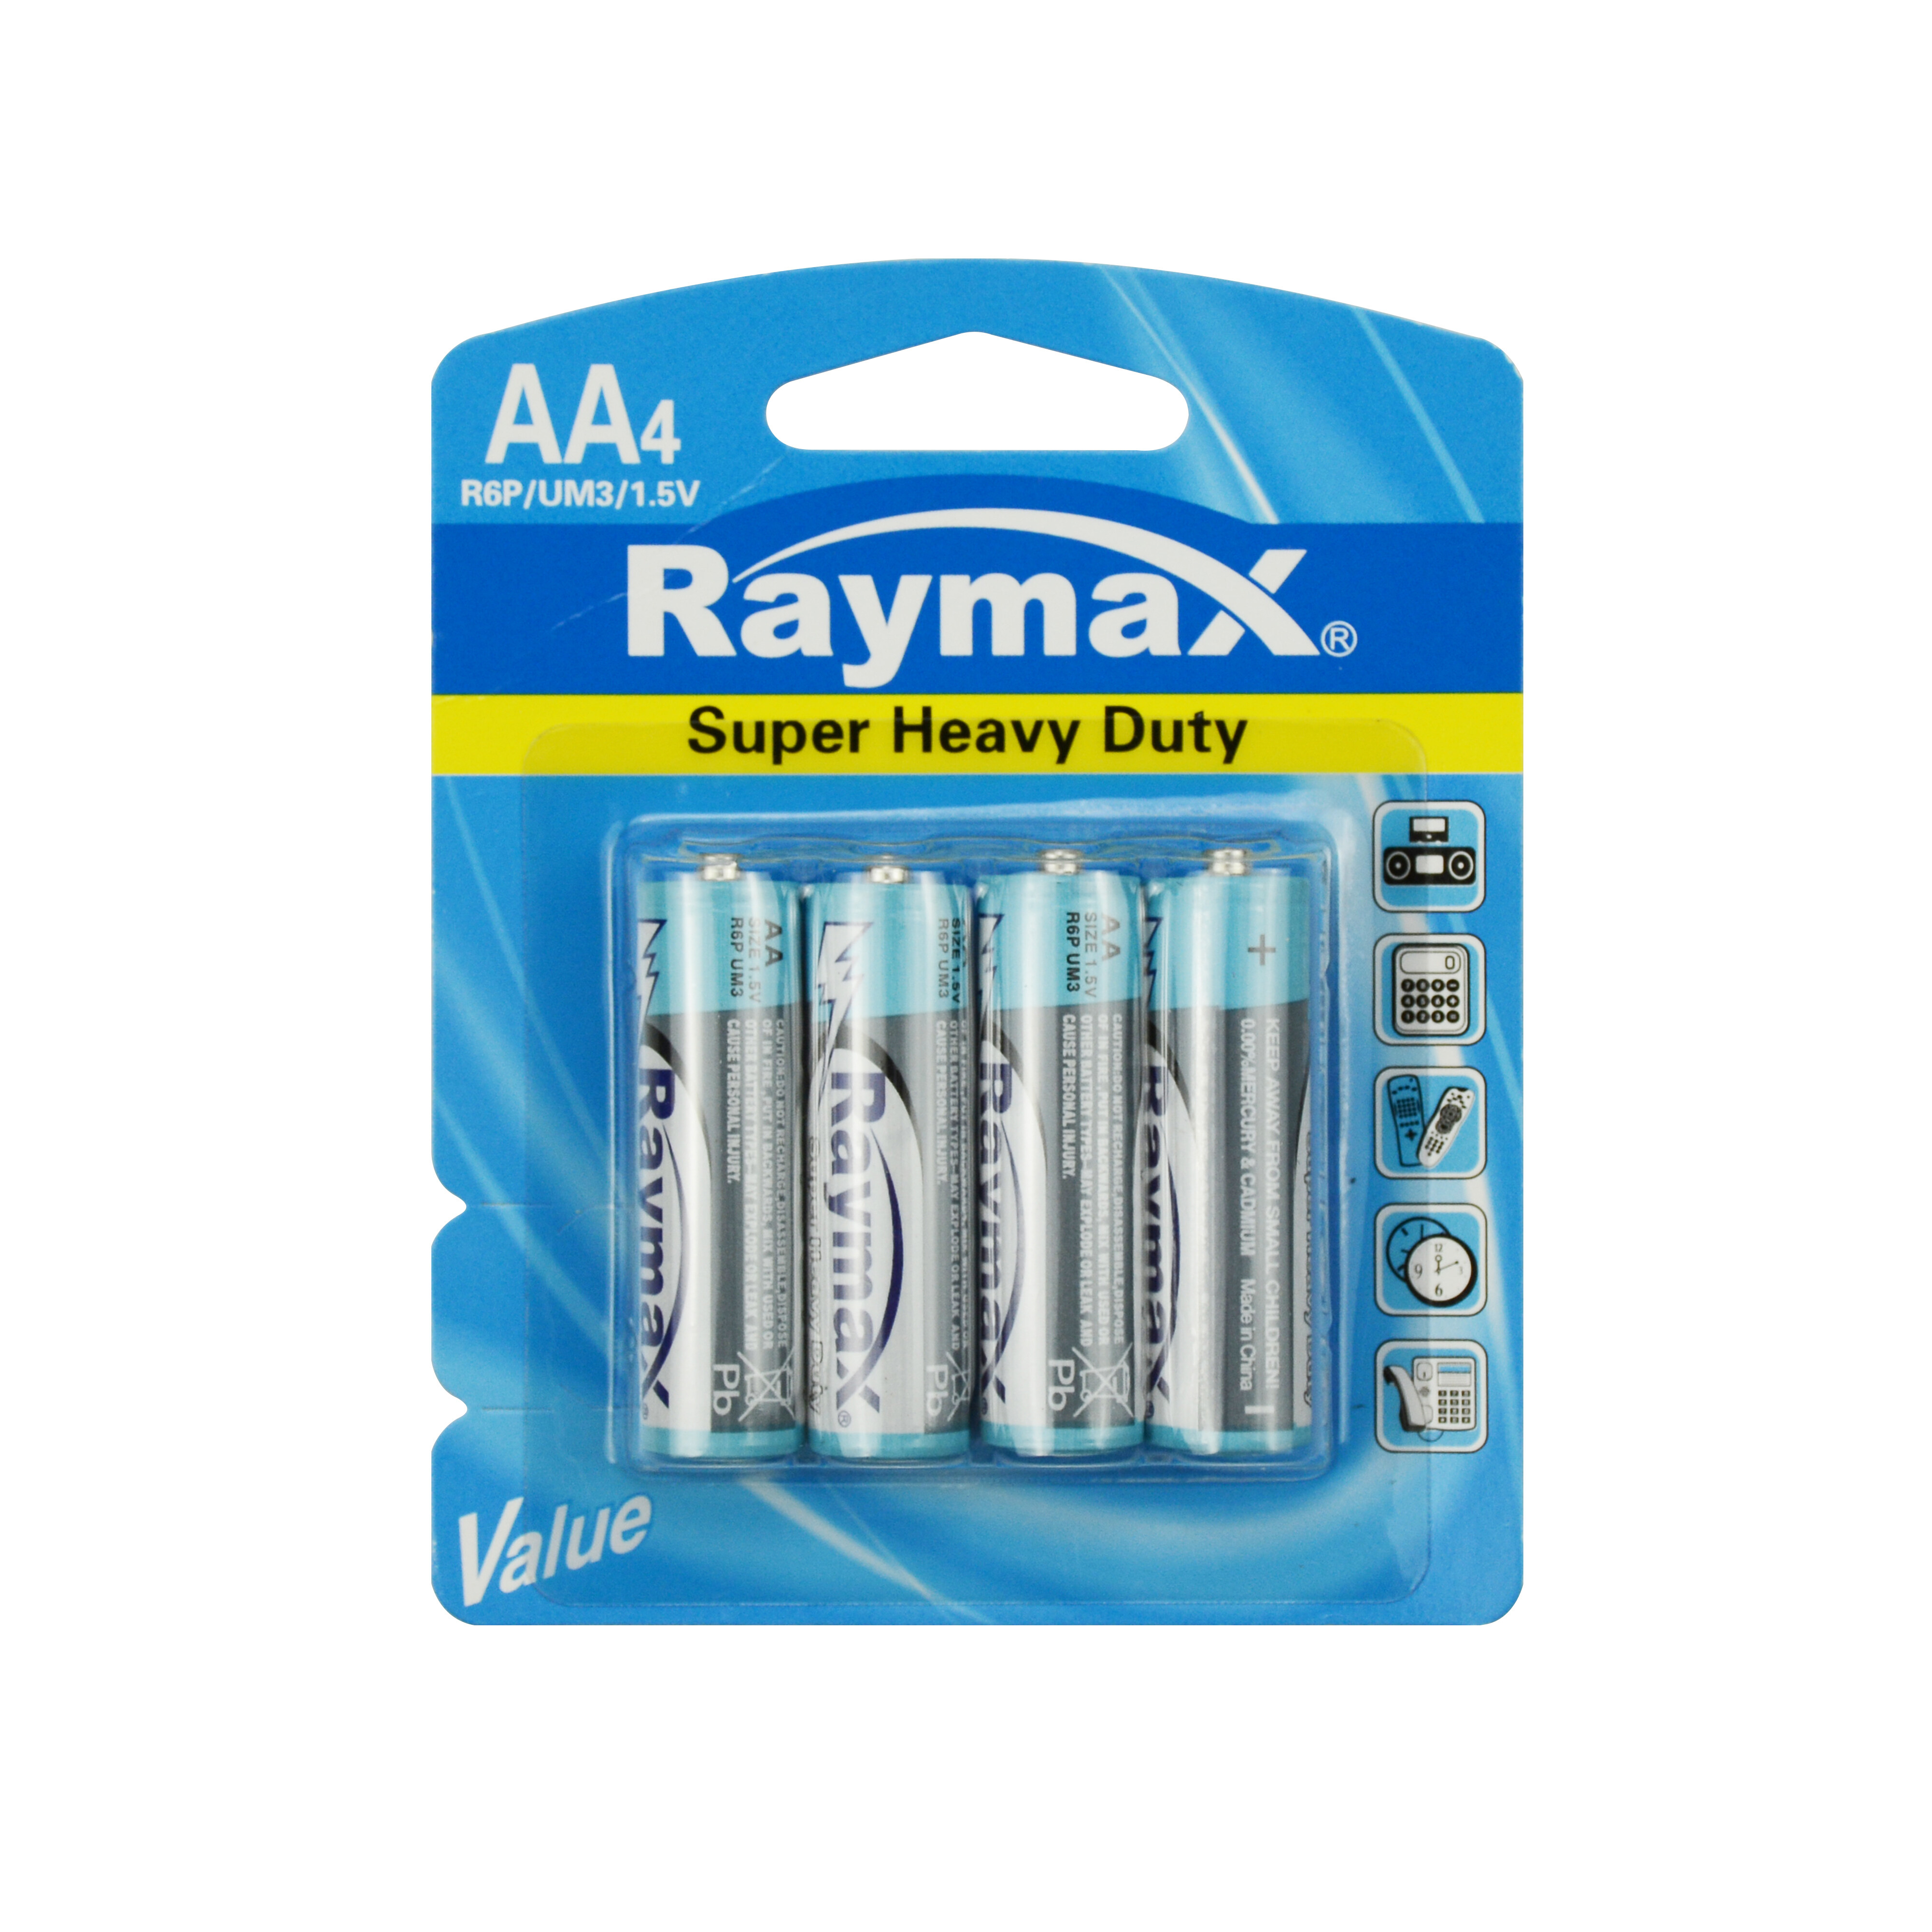 Raymax OEM 1.5v R6P AA Um3 Zinc Carbon Battery wholesale, Pack of 4